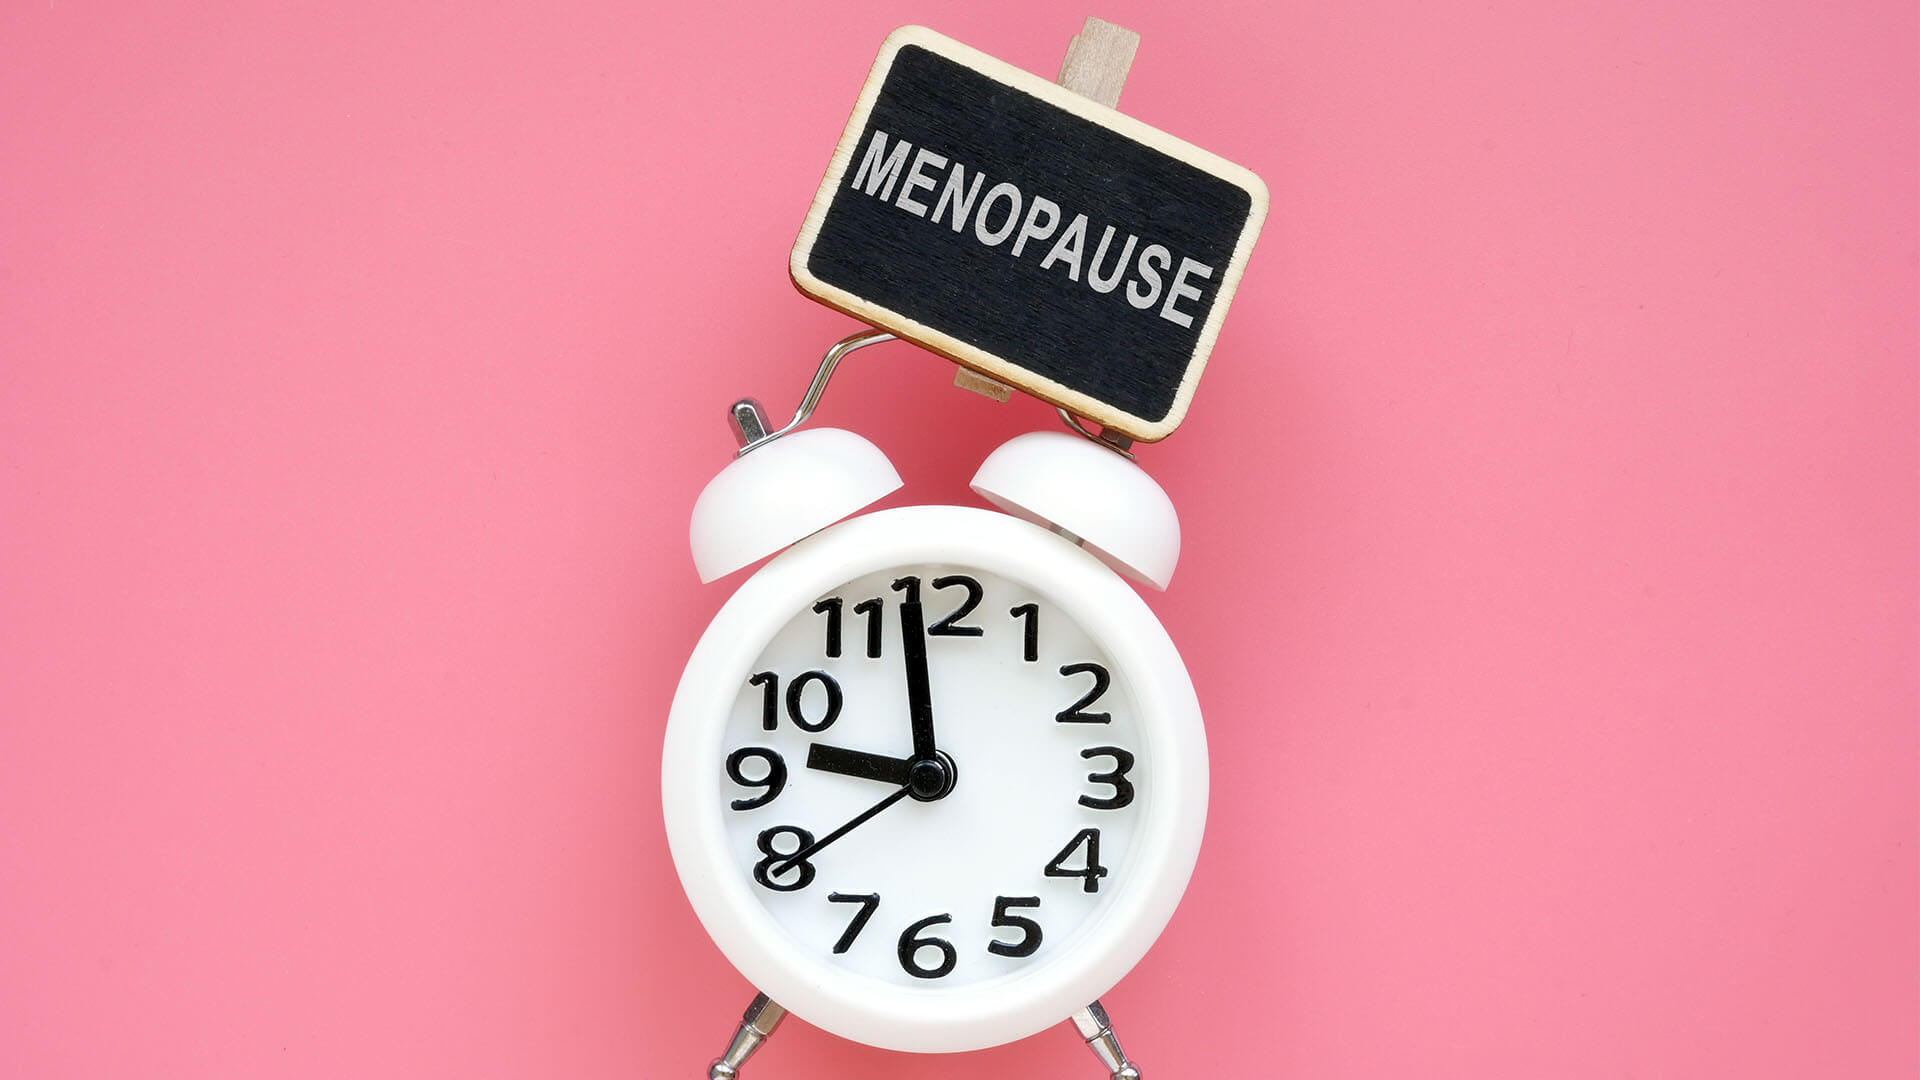 How to Make the Menopause a New Beginning